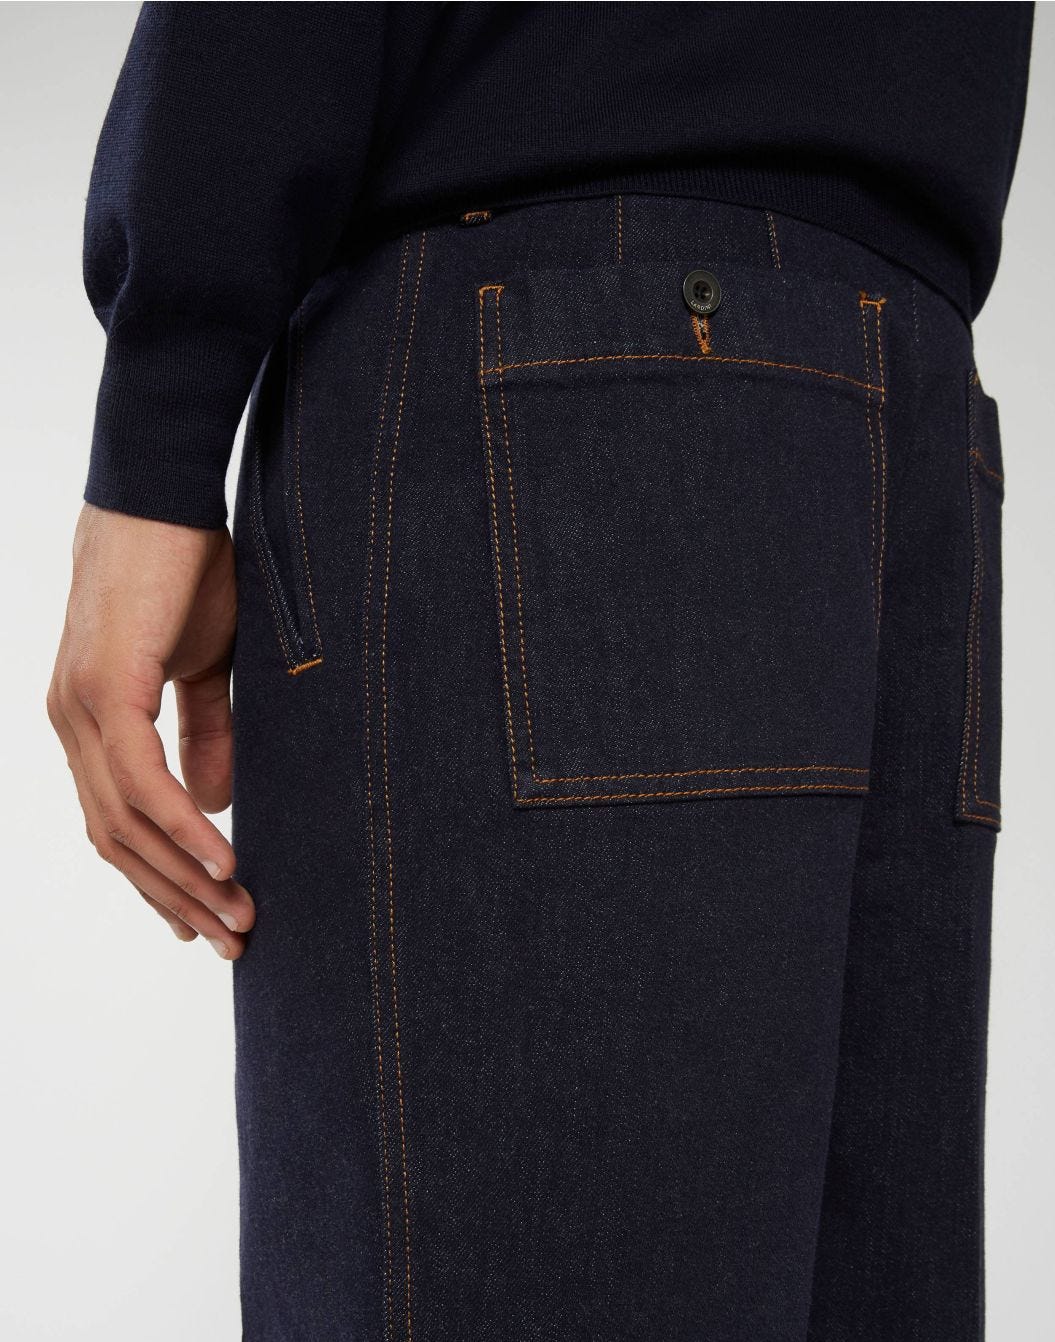 Blue workwear trousers with a button fly - Denim 01